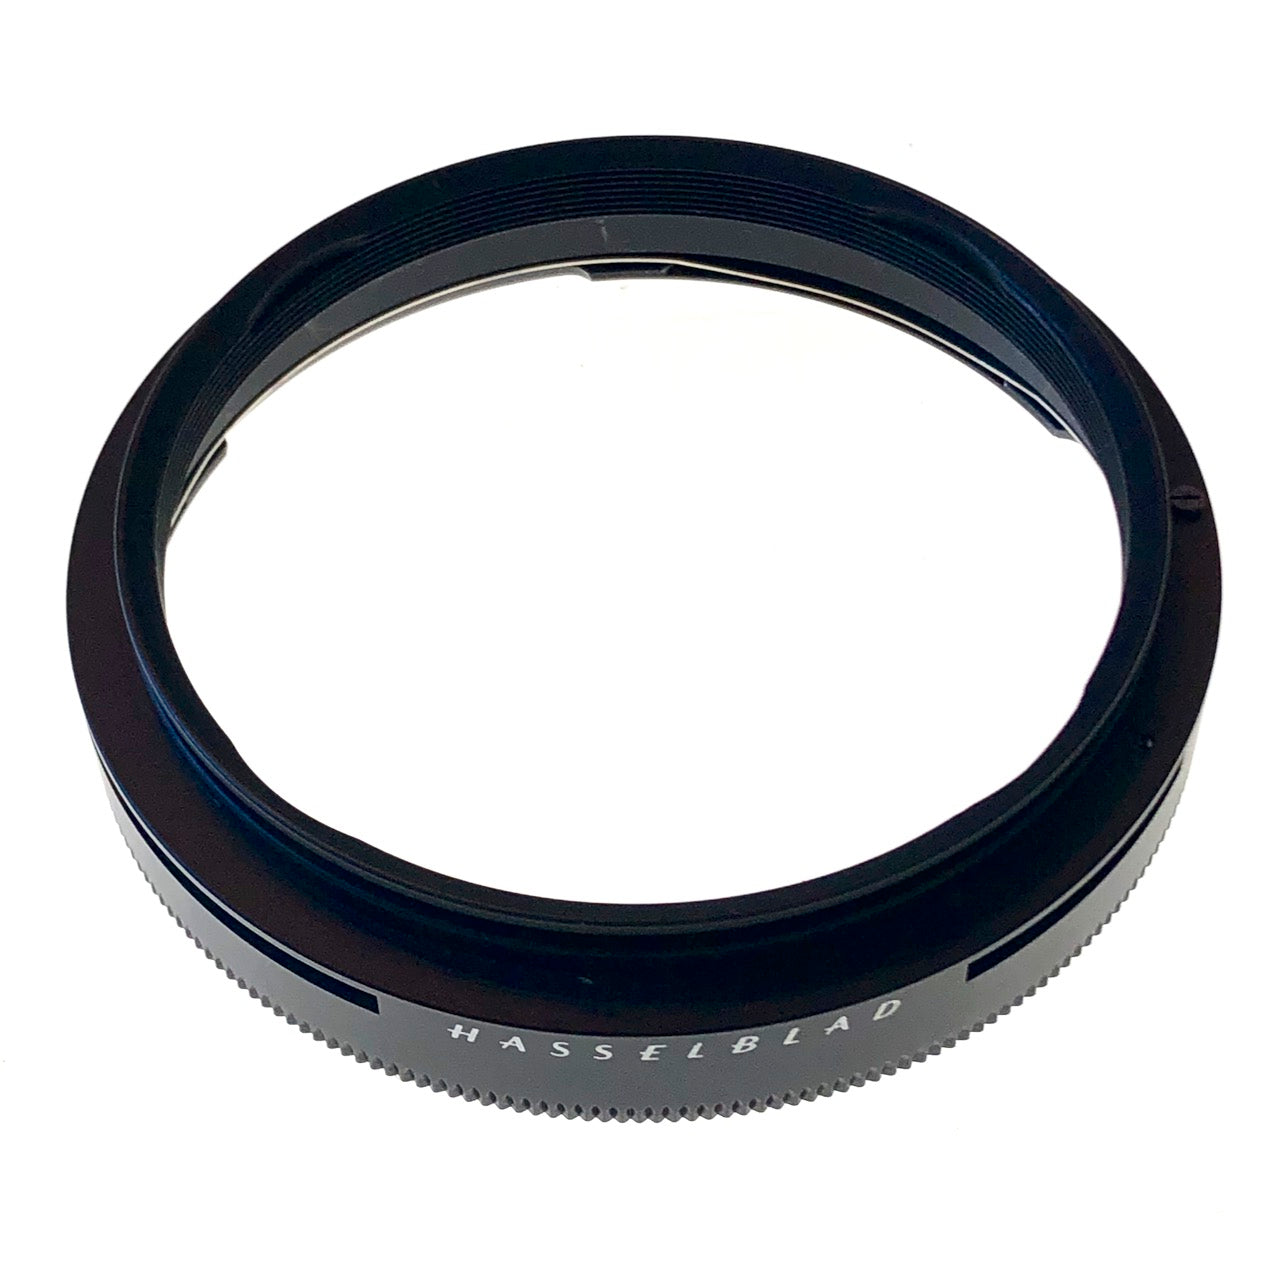 Hasselblad 40687 lens mounting ring for B70